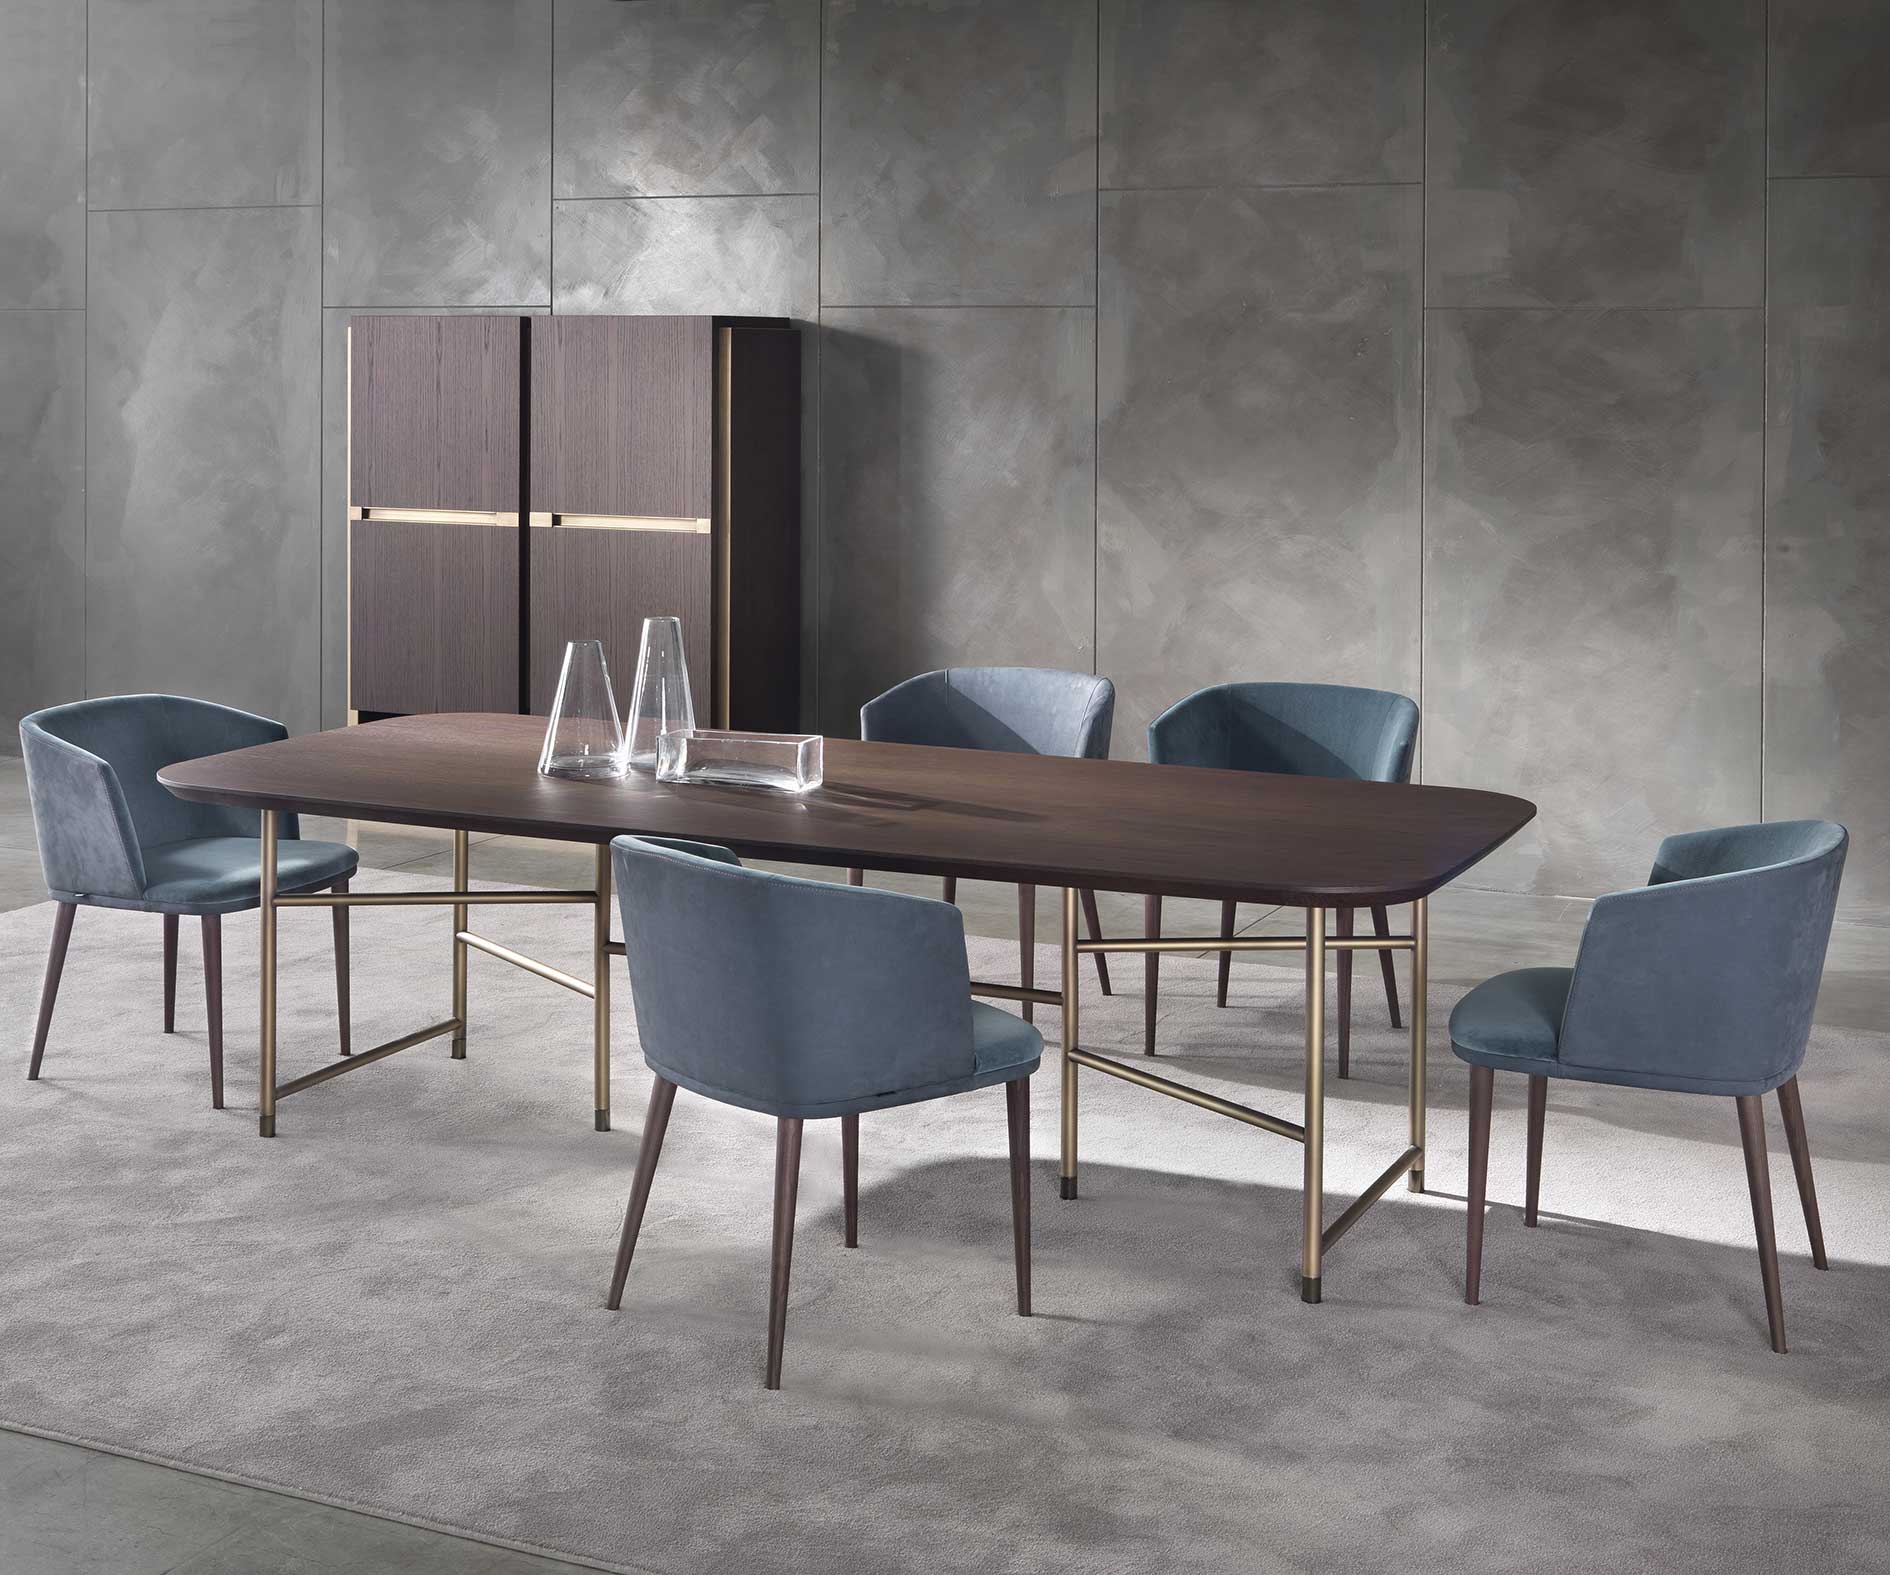 Kyoto Dining Table by Marelli